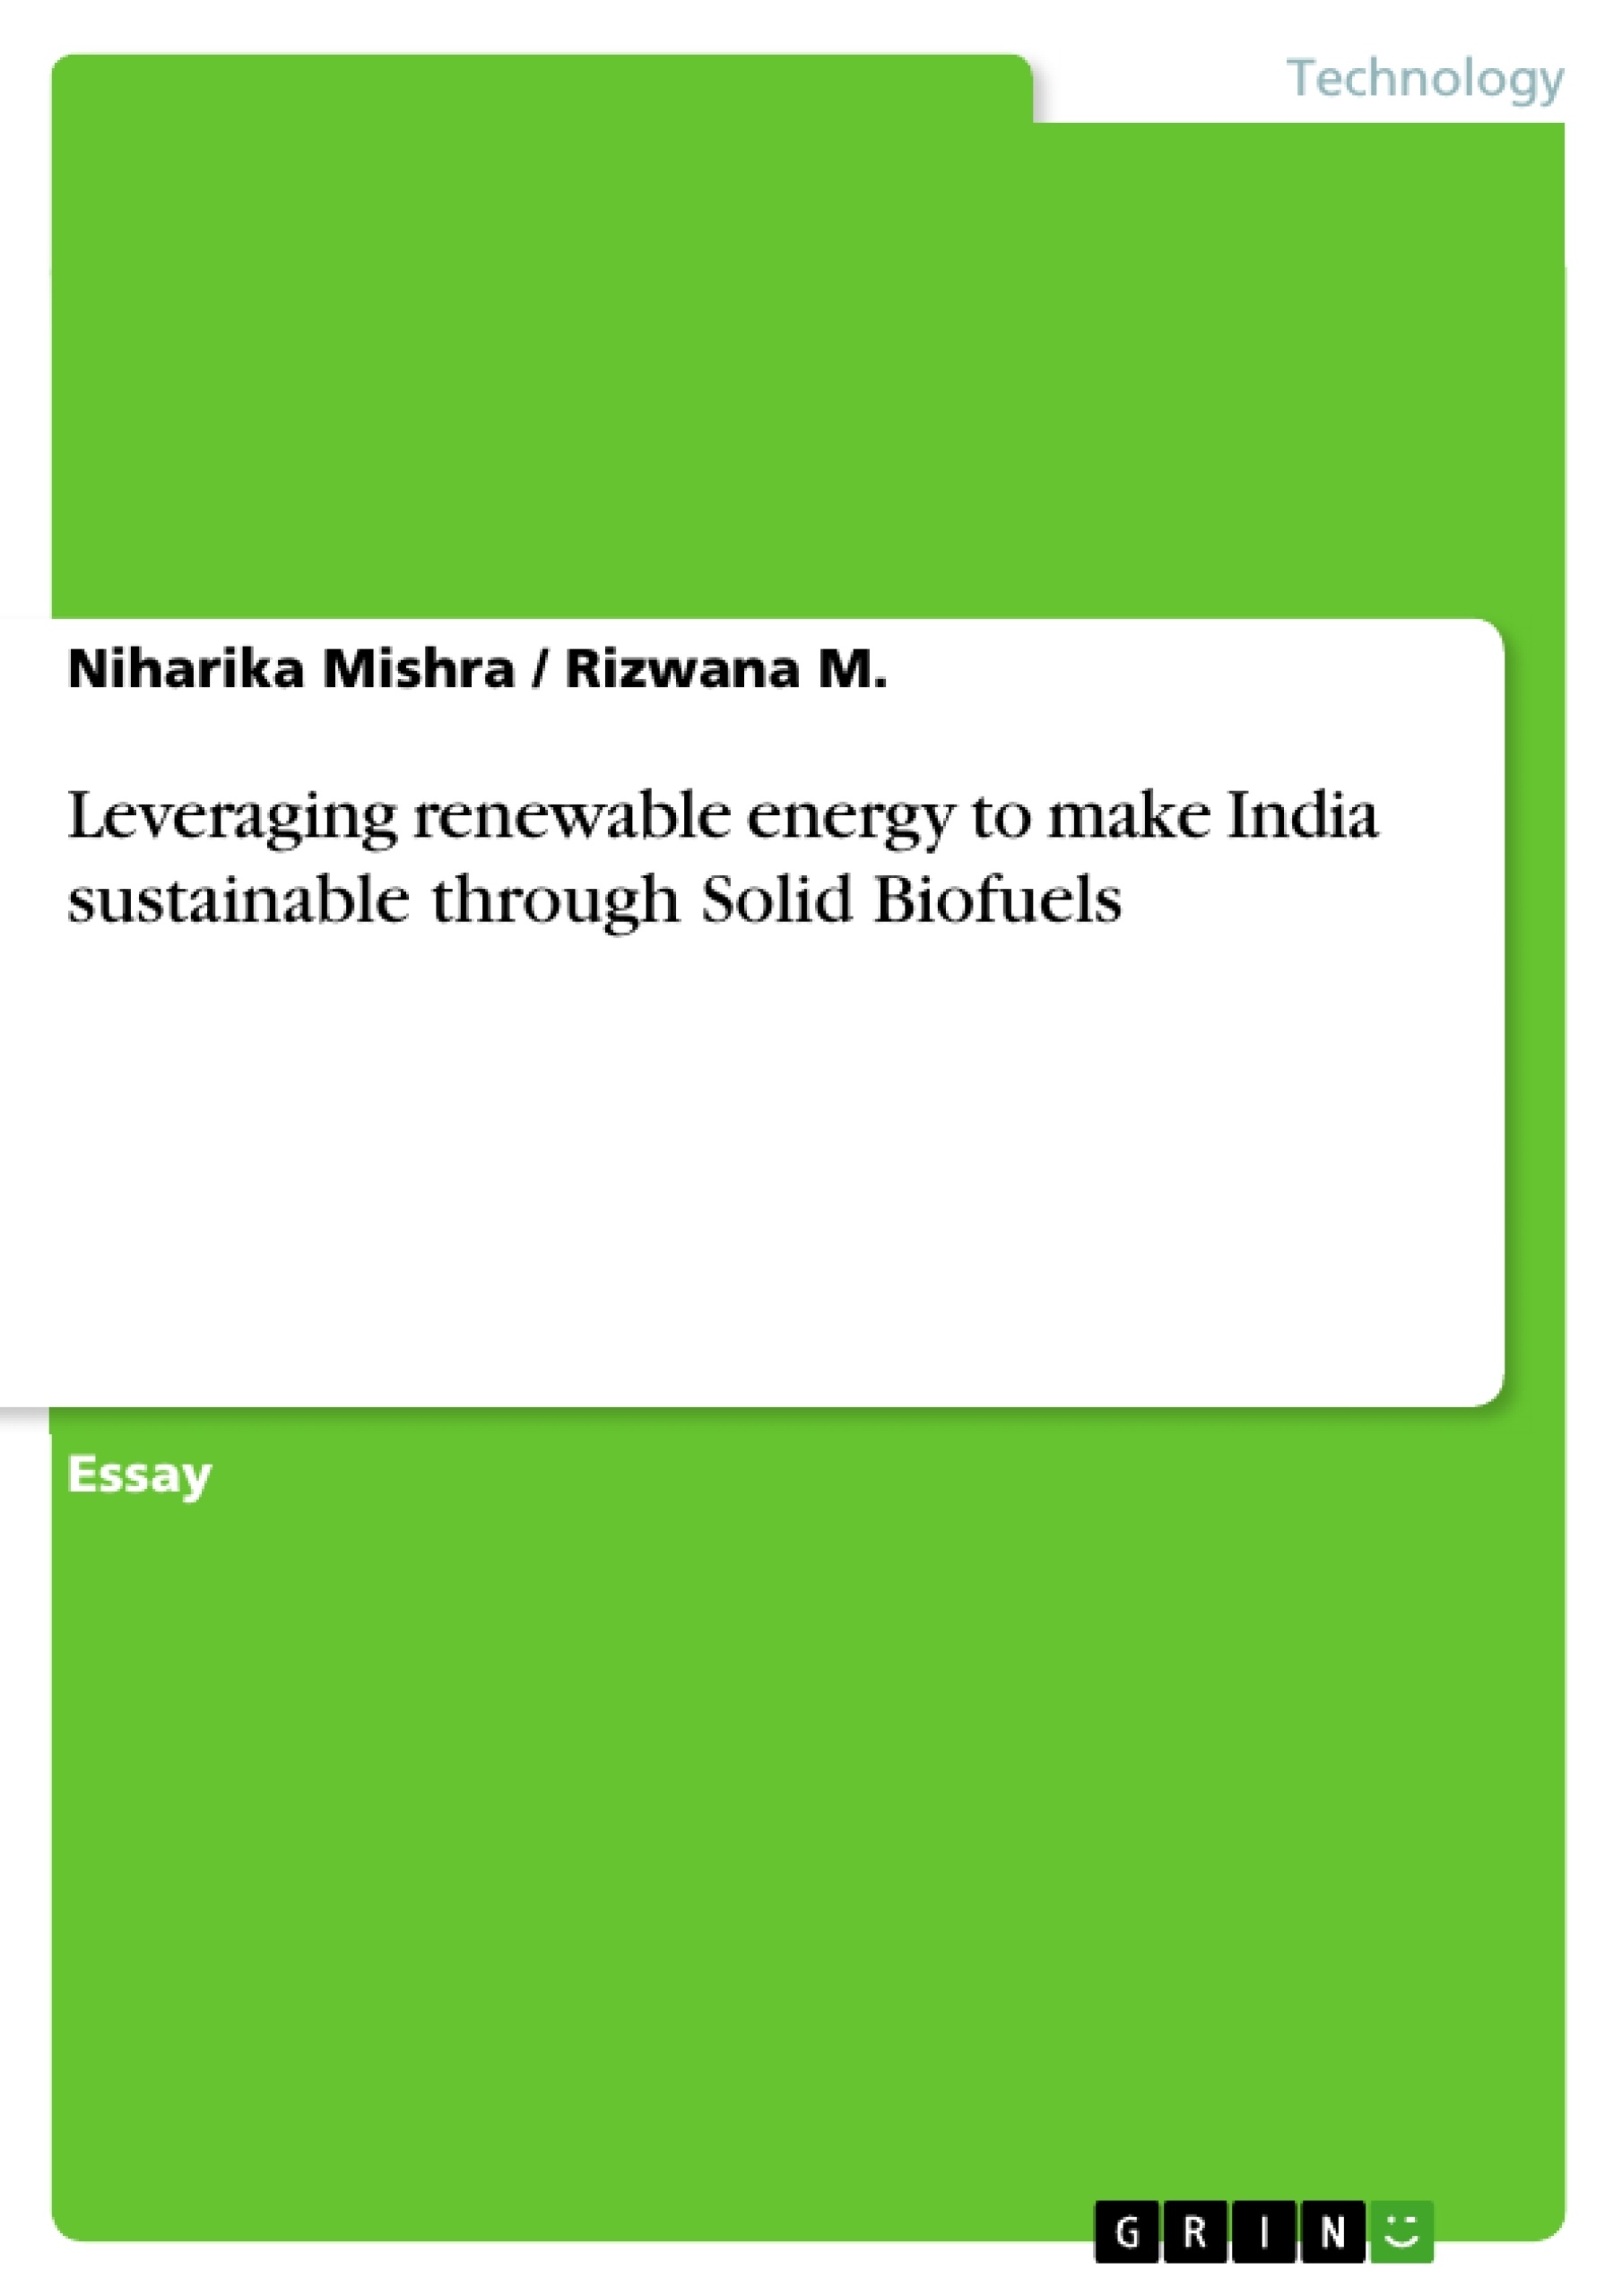 Title: Leveraging renewable energy to make India sustainable through Solid Biofuels